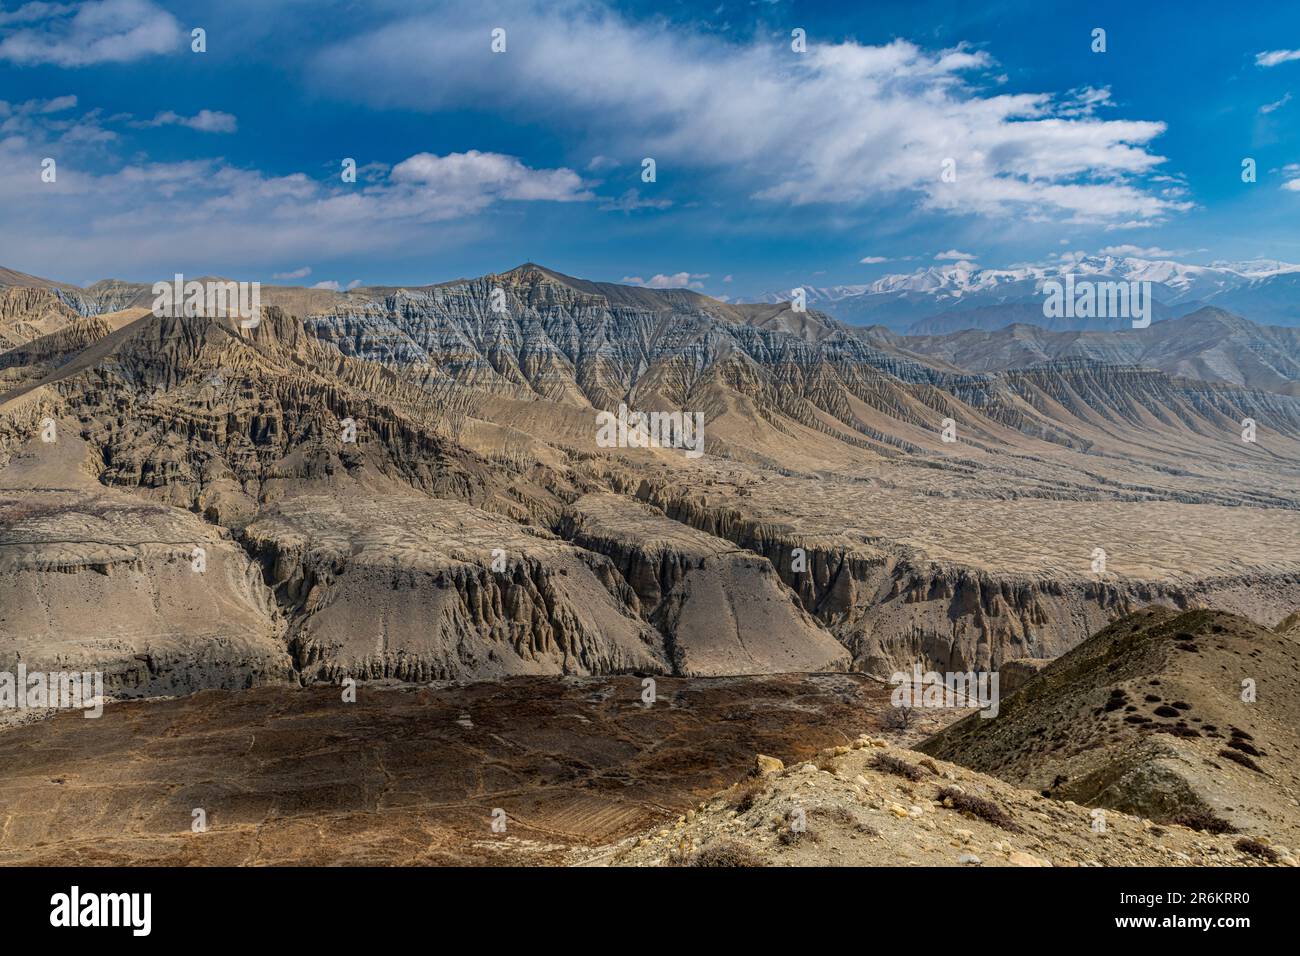 Eroded mountain landscape in the Kingdom of Mustang, Himalayas, Nepal, Asia Stock Photo